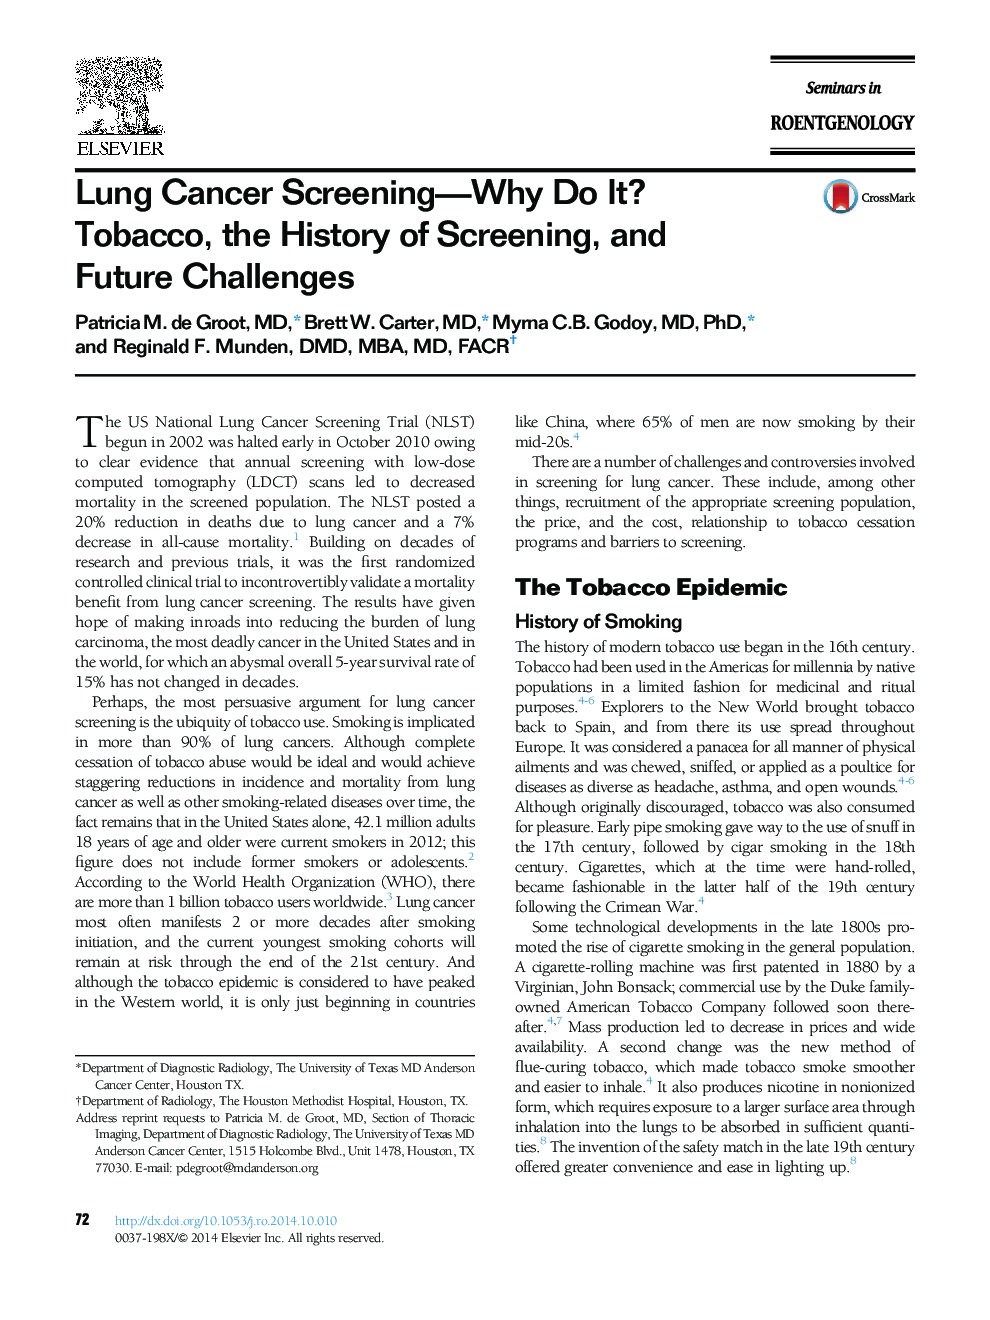 Lung Cancer Screening-Why Do It? Tobacco, the History of Screening, and Future Challenges